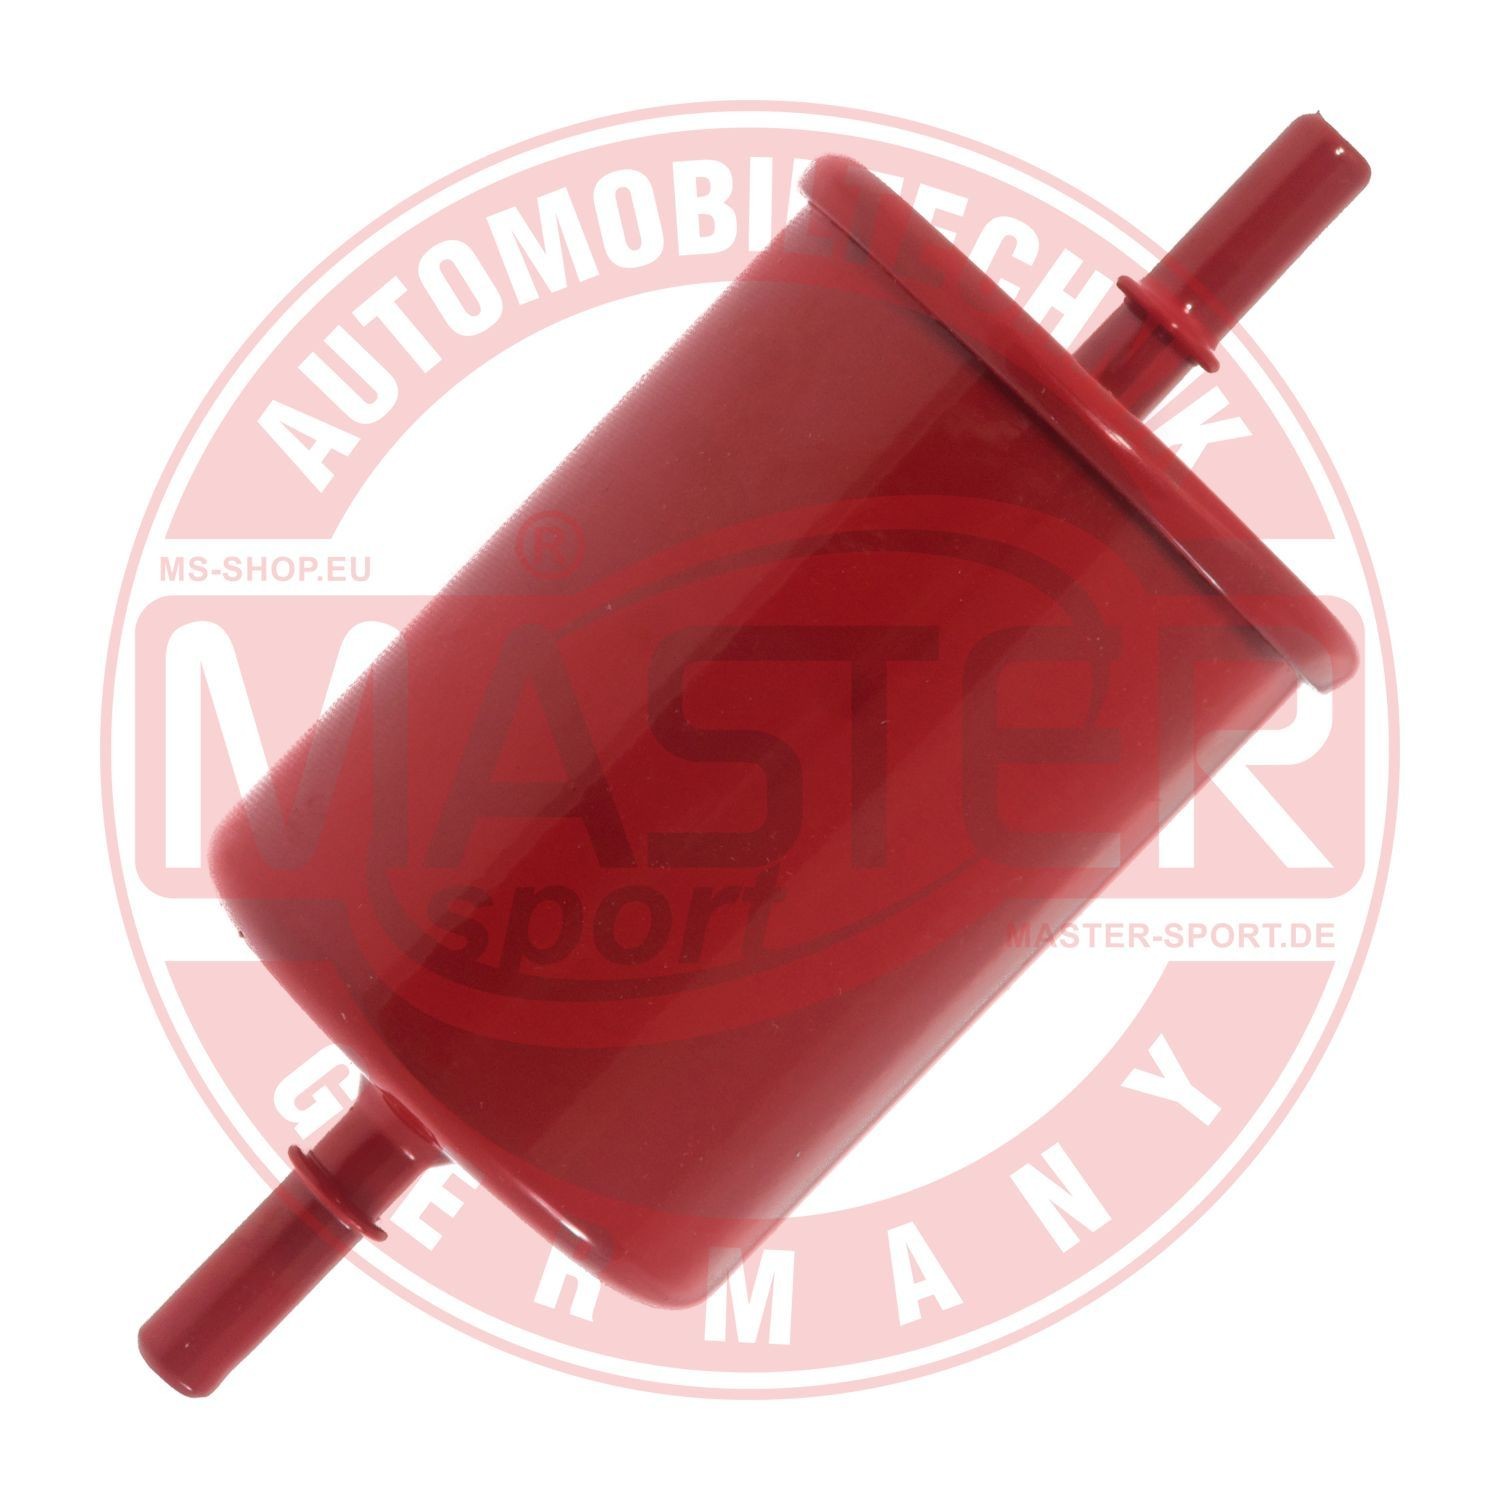 MASTER-SPORT Fuel filter In-Line Filter 612/1-KF-PCS-MS HONDA Moped Maxi scooters